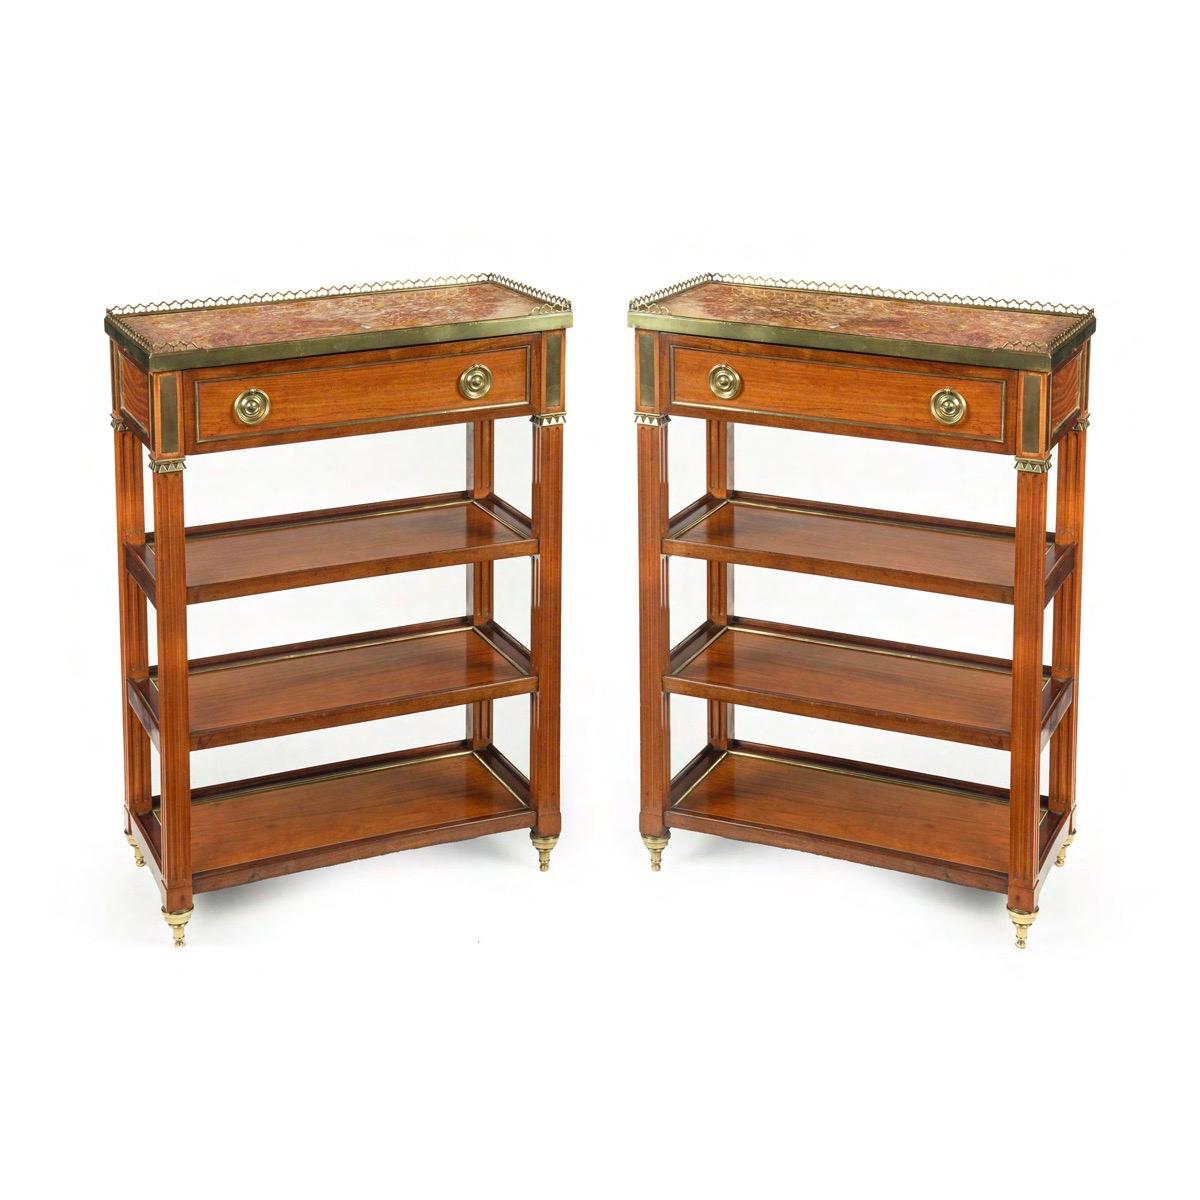 A pair of Napoleon III satinwood side tables or bedside tables, each of rectangular form with a marble top (repaired) surrounded by a brass pierced gallery, all above a single frieze drawer and three shelves, decorated throughout with unusual brass